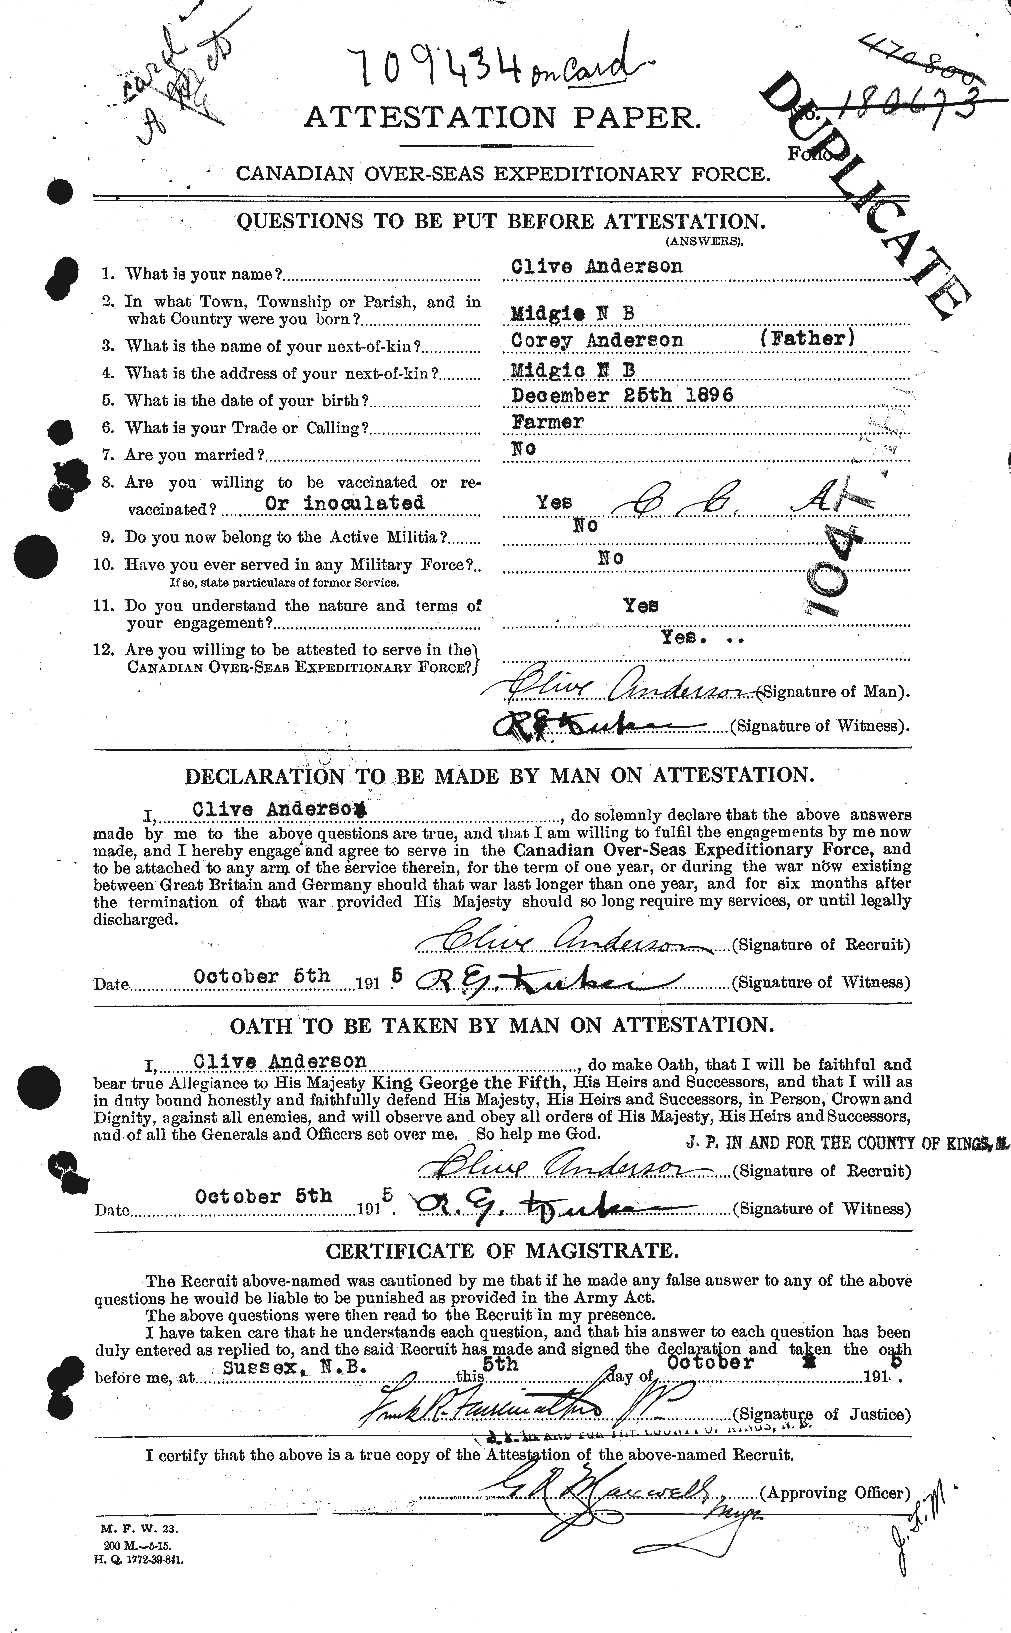 Personnel Records of the First World War - CEF 210058a